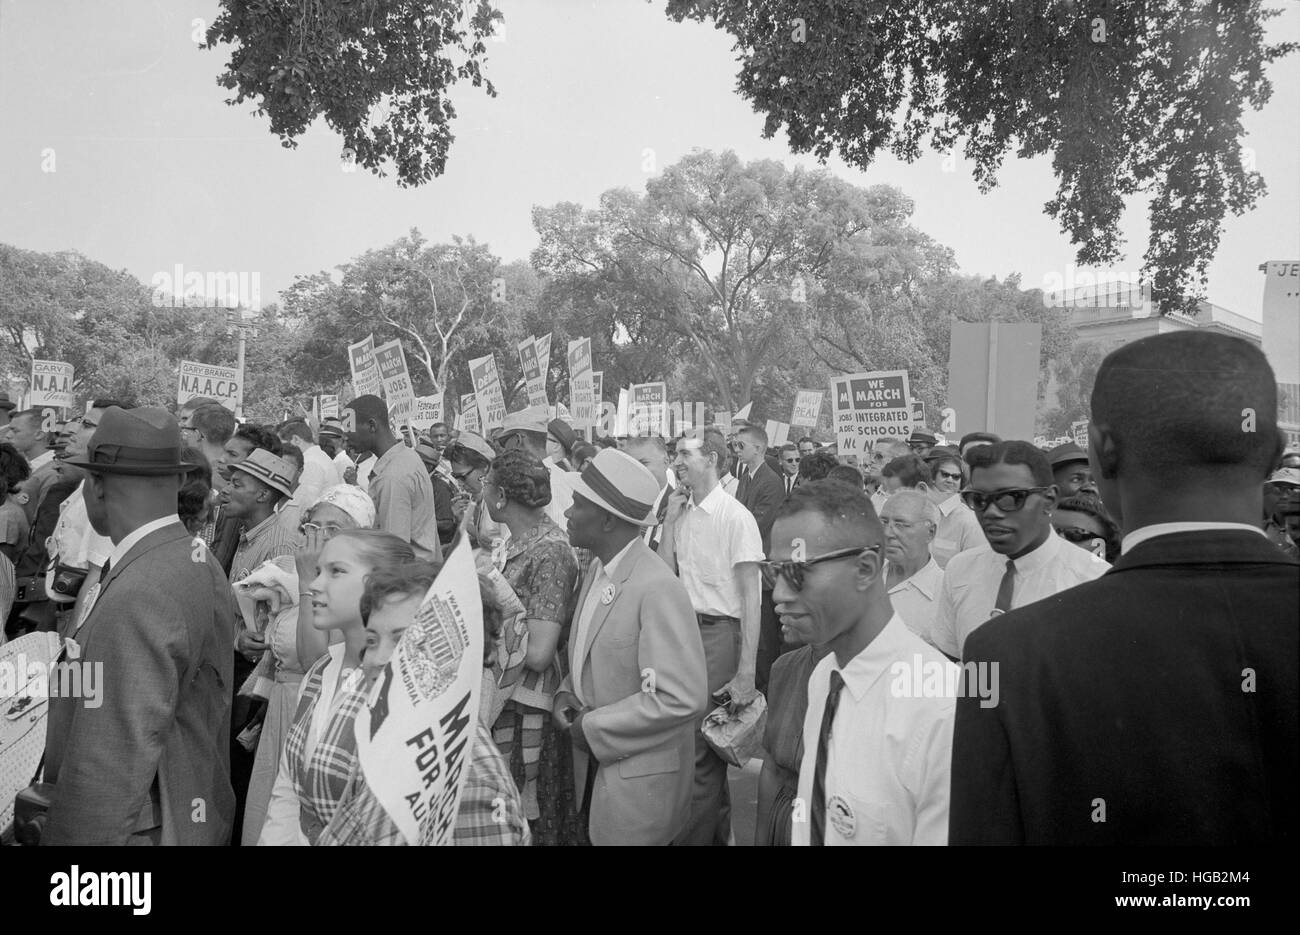 August 28, 1963 - Protestors during the March on Washington. Stock Photo